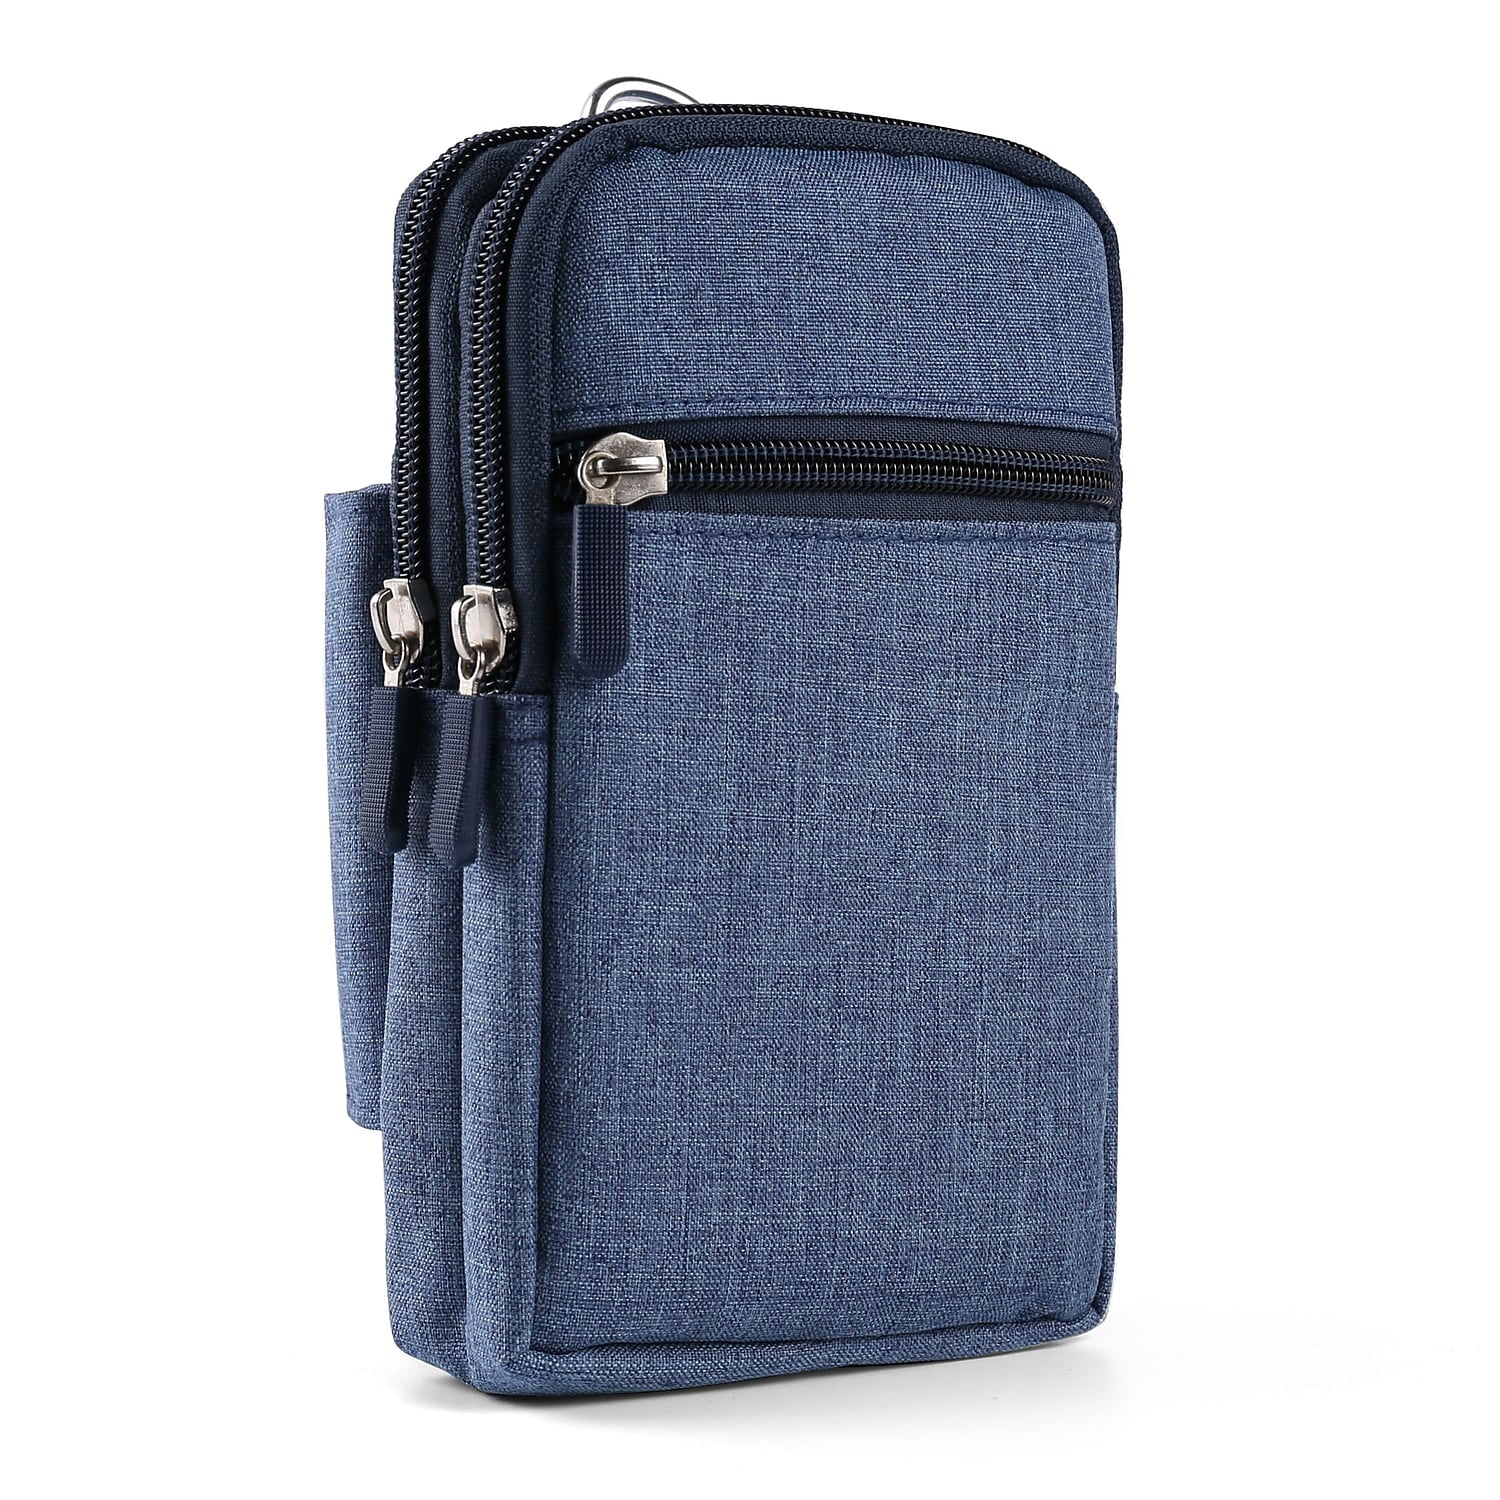 SumacLife Blue Universal Utility Travel Waist Pouch Carrying Case